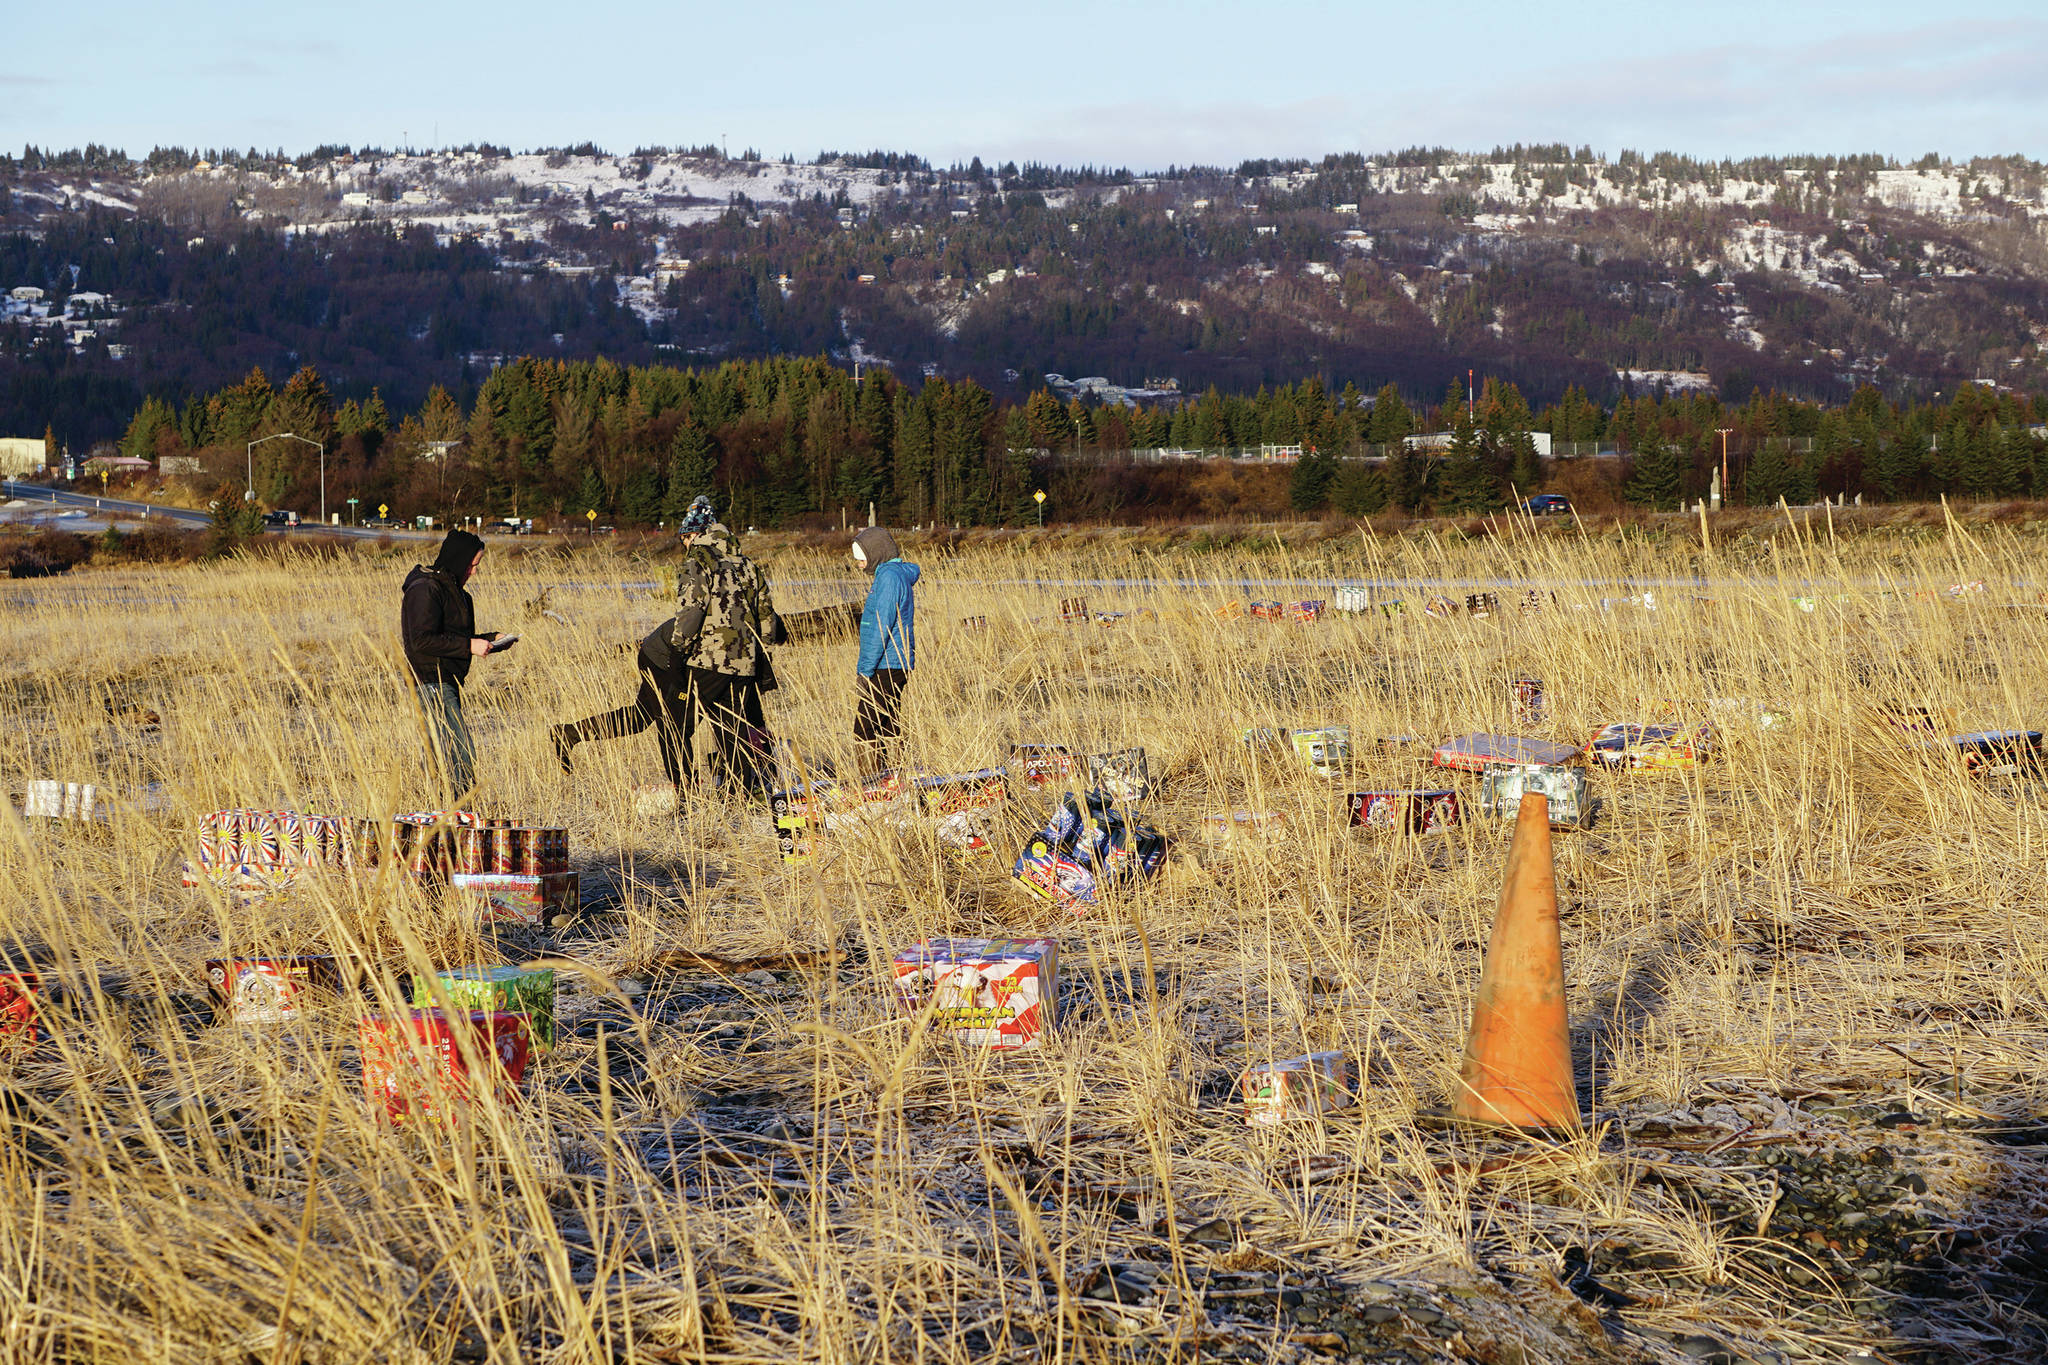 Fireworks are set up on Thursday, Dec. 31, 2020, in advance of the show later that night at Mariner Park on the Homer Spit in Homer, Alaska. (Photo by Michael Armstrong/Homer News)